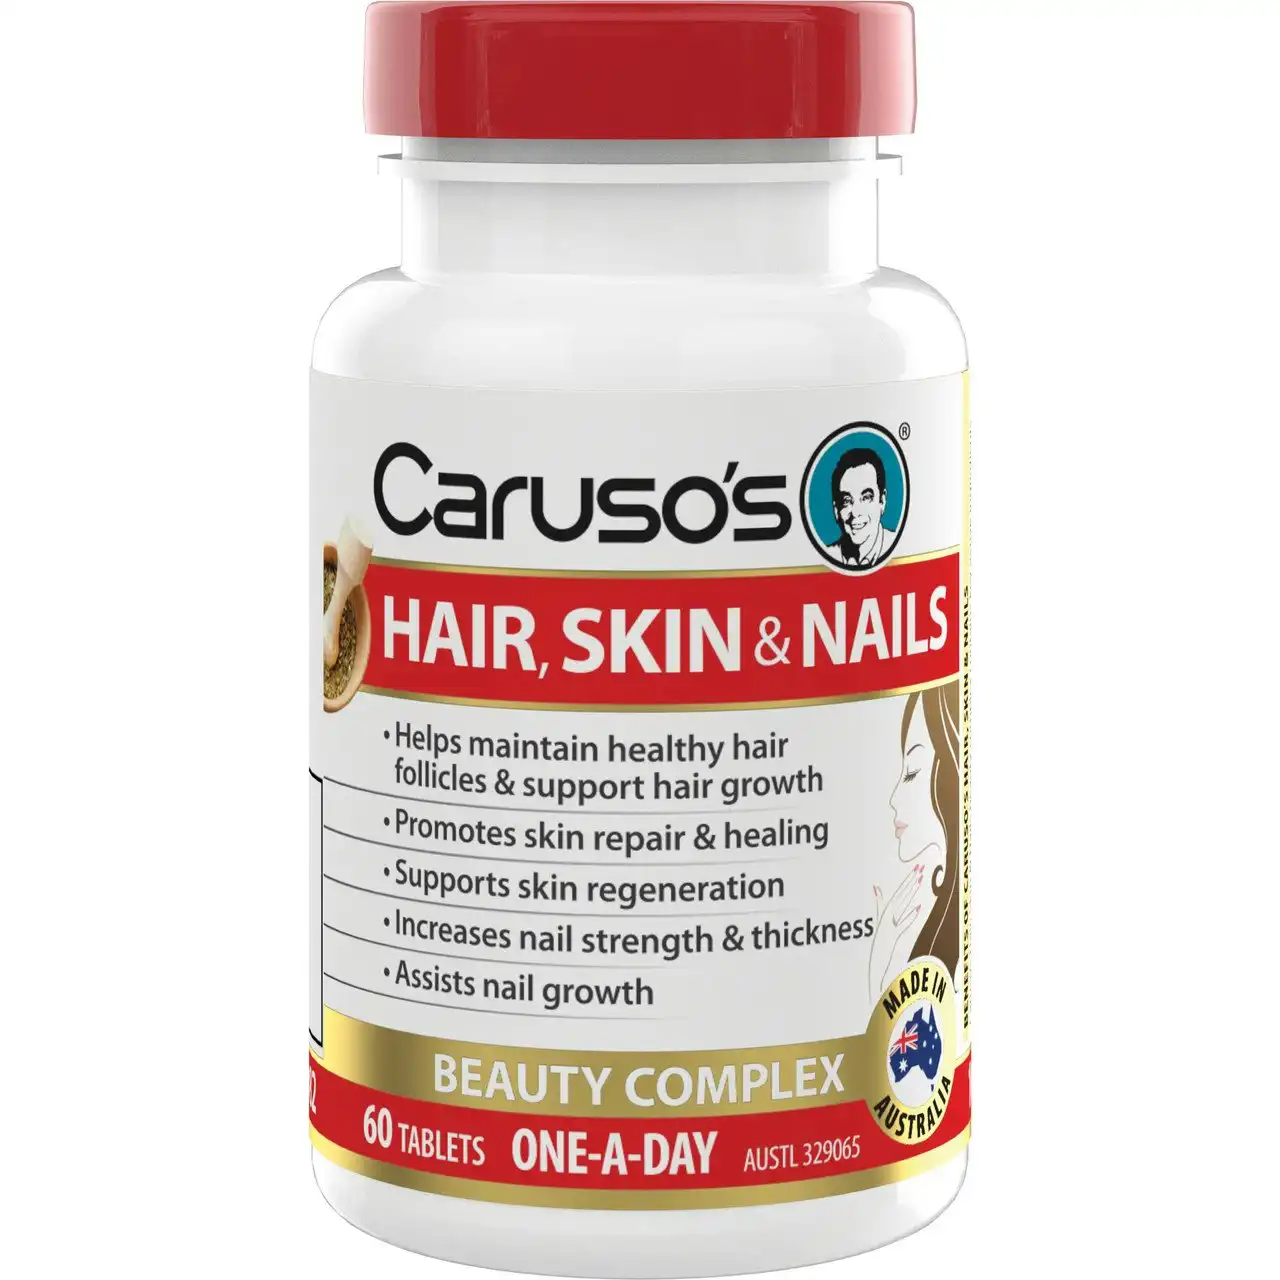 Caruso's Hair, Skin and Nails 60 Tablets